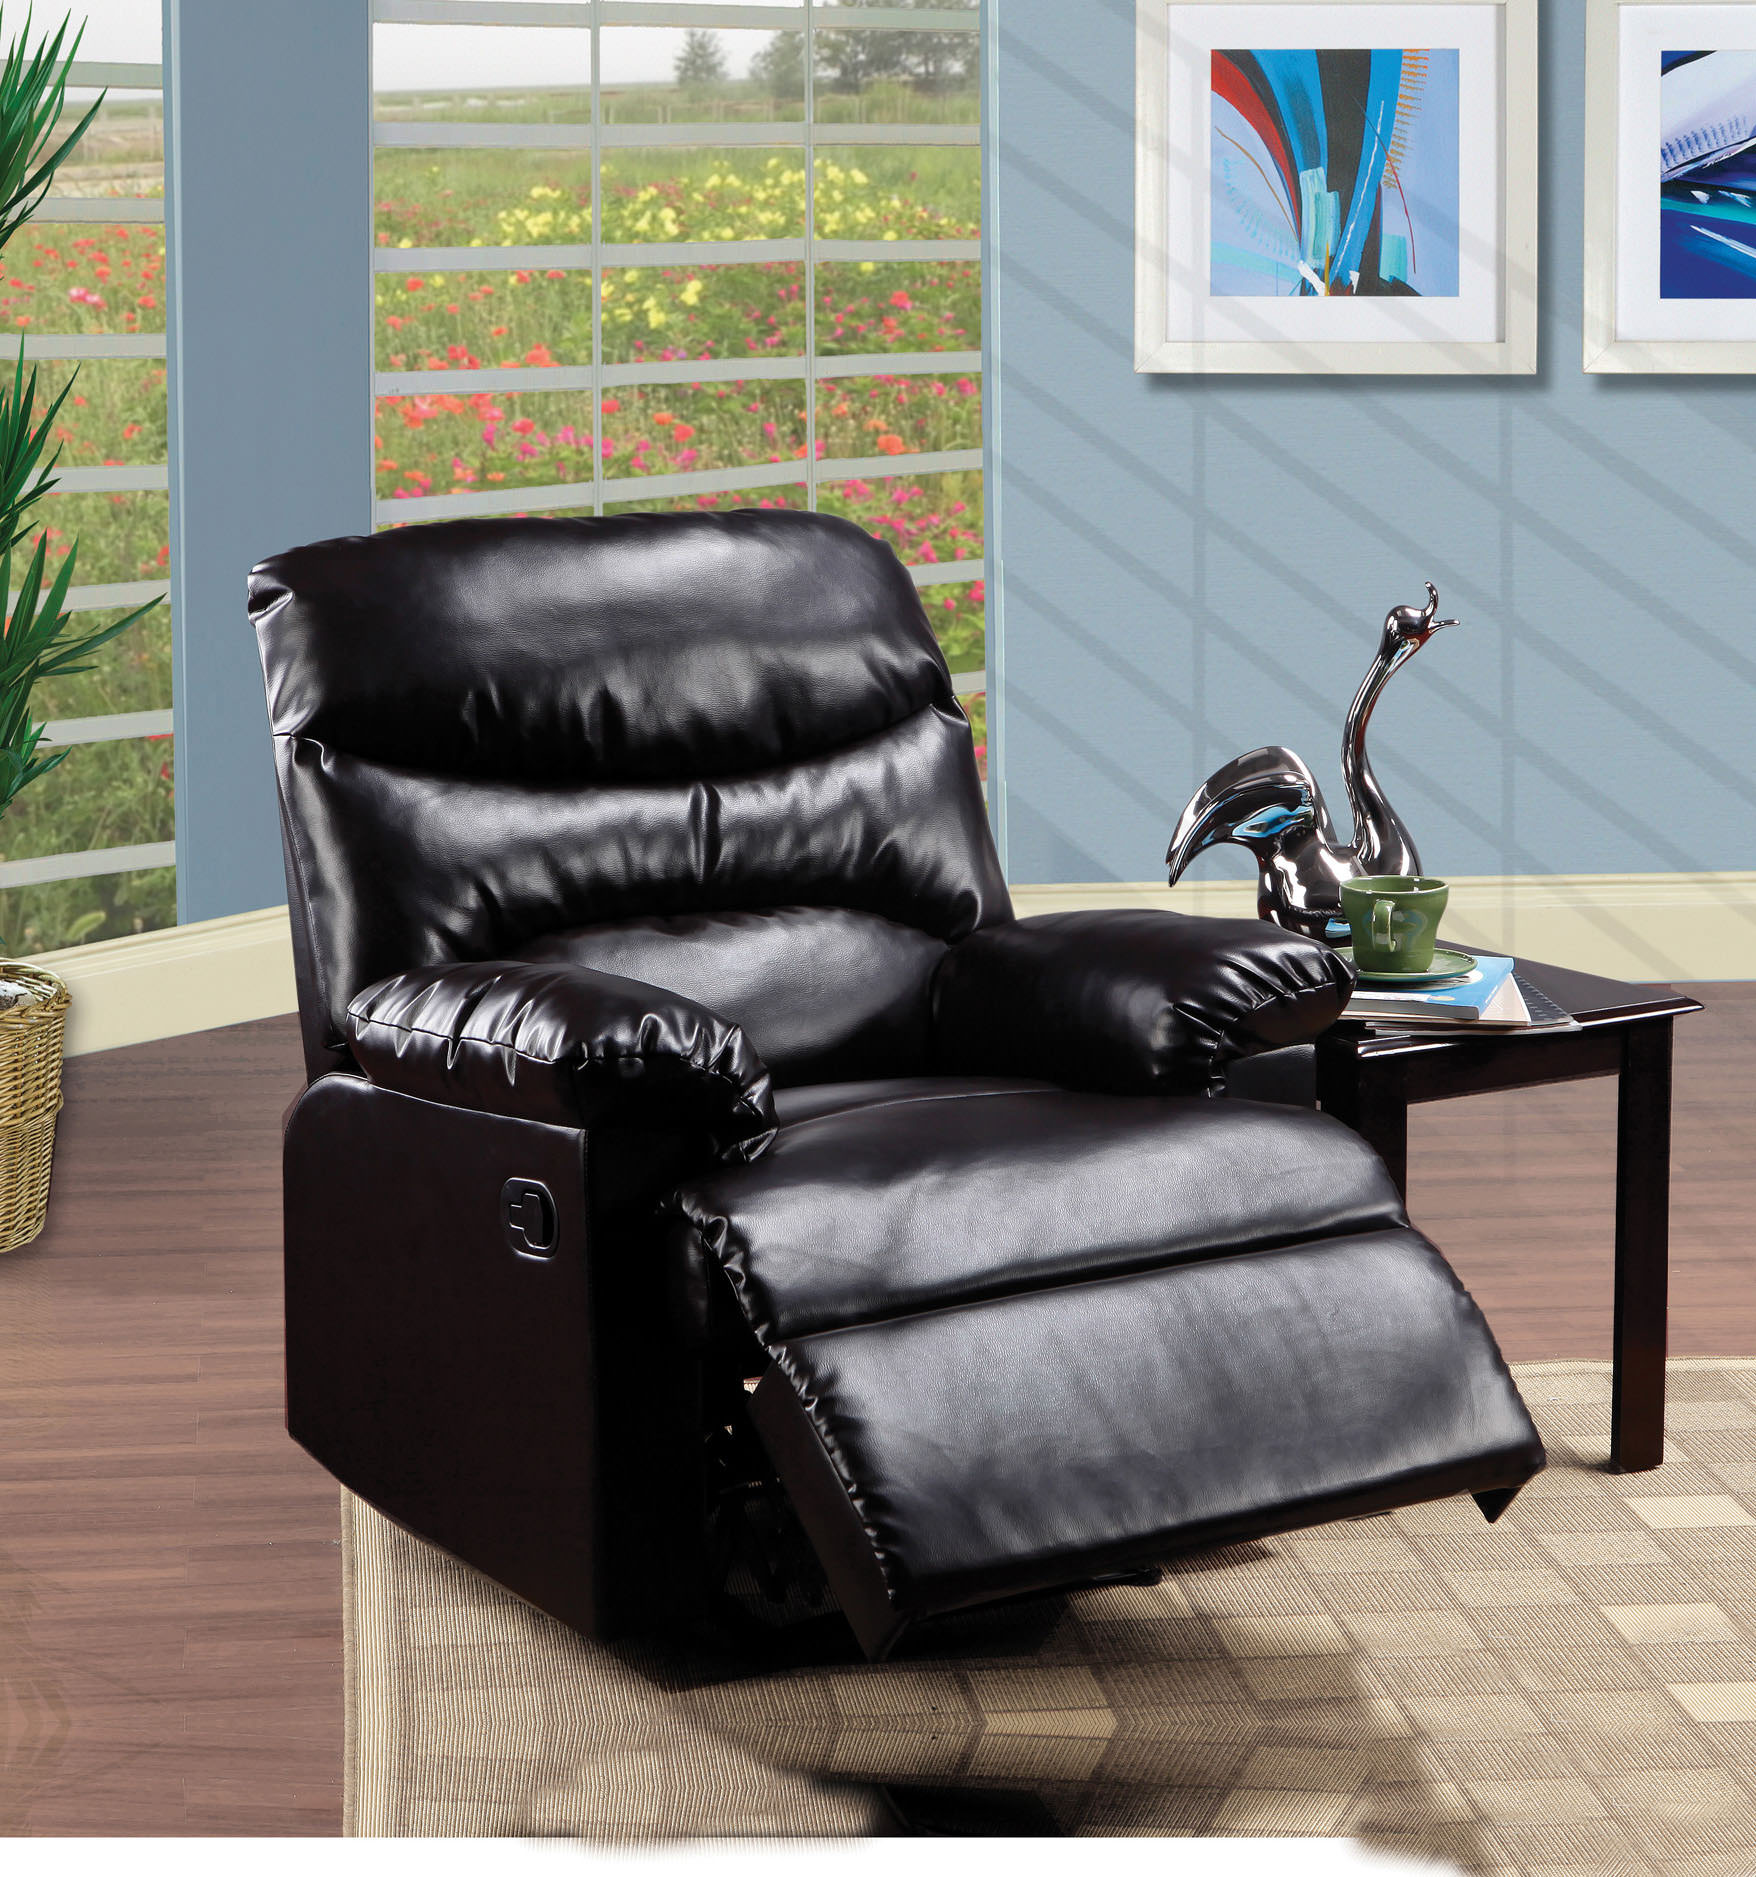 Acme Furniture Arcadia Recliner in Espresso Bonded Leather - image 2 of 2